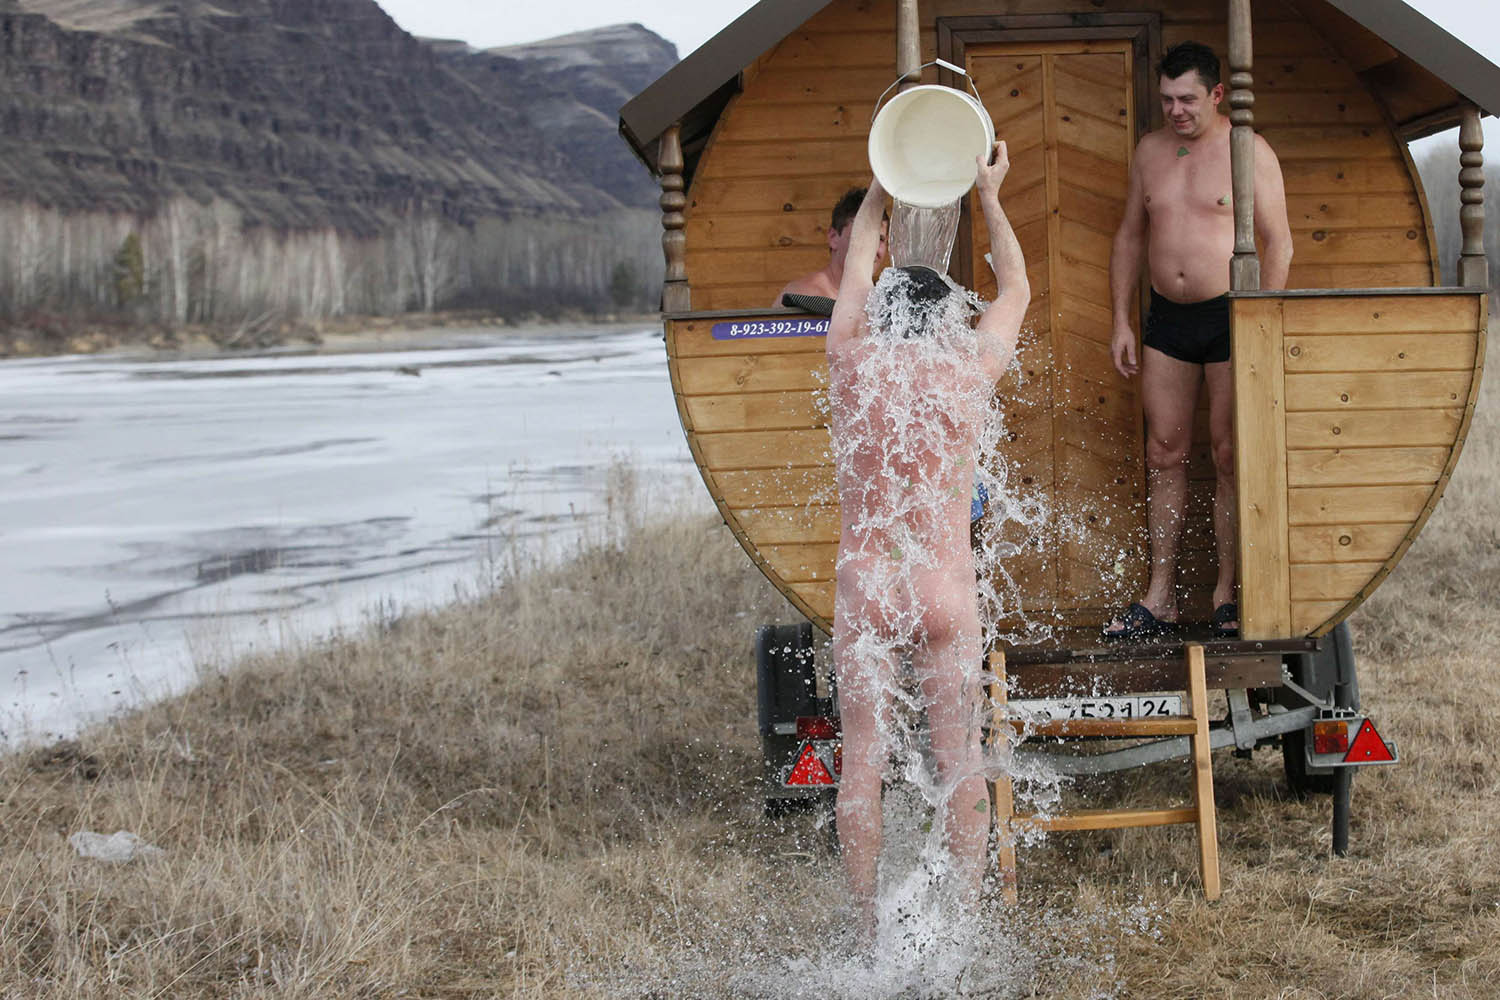 A friend of local resident Krasin cools off with cold water after a steam bath in his mobile bathing station on the banks of the Tuba river near the village of Kochergino